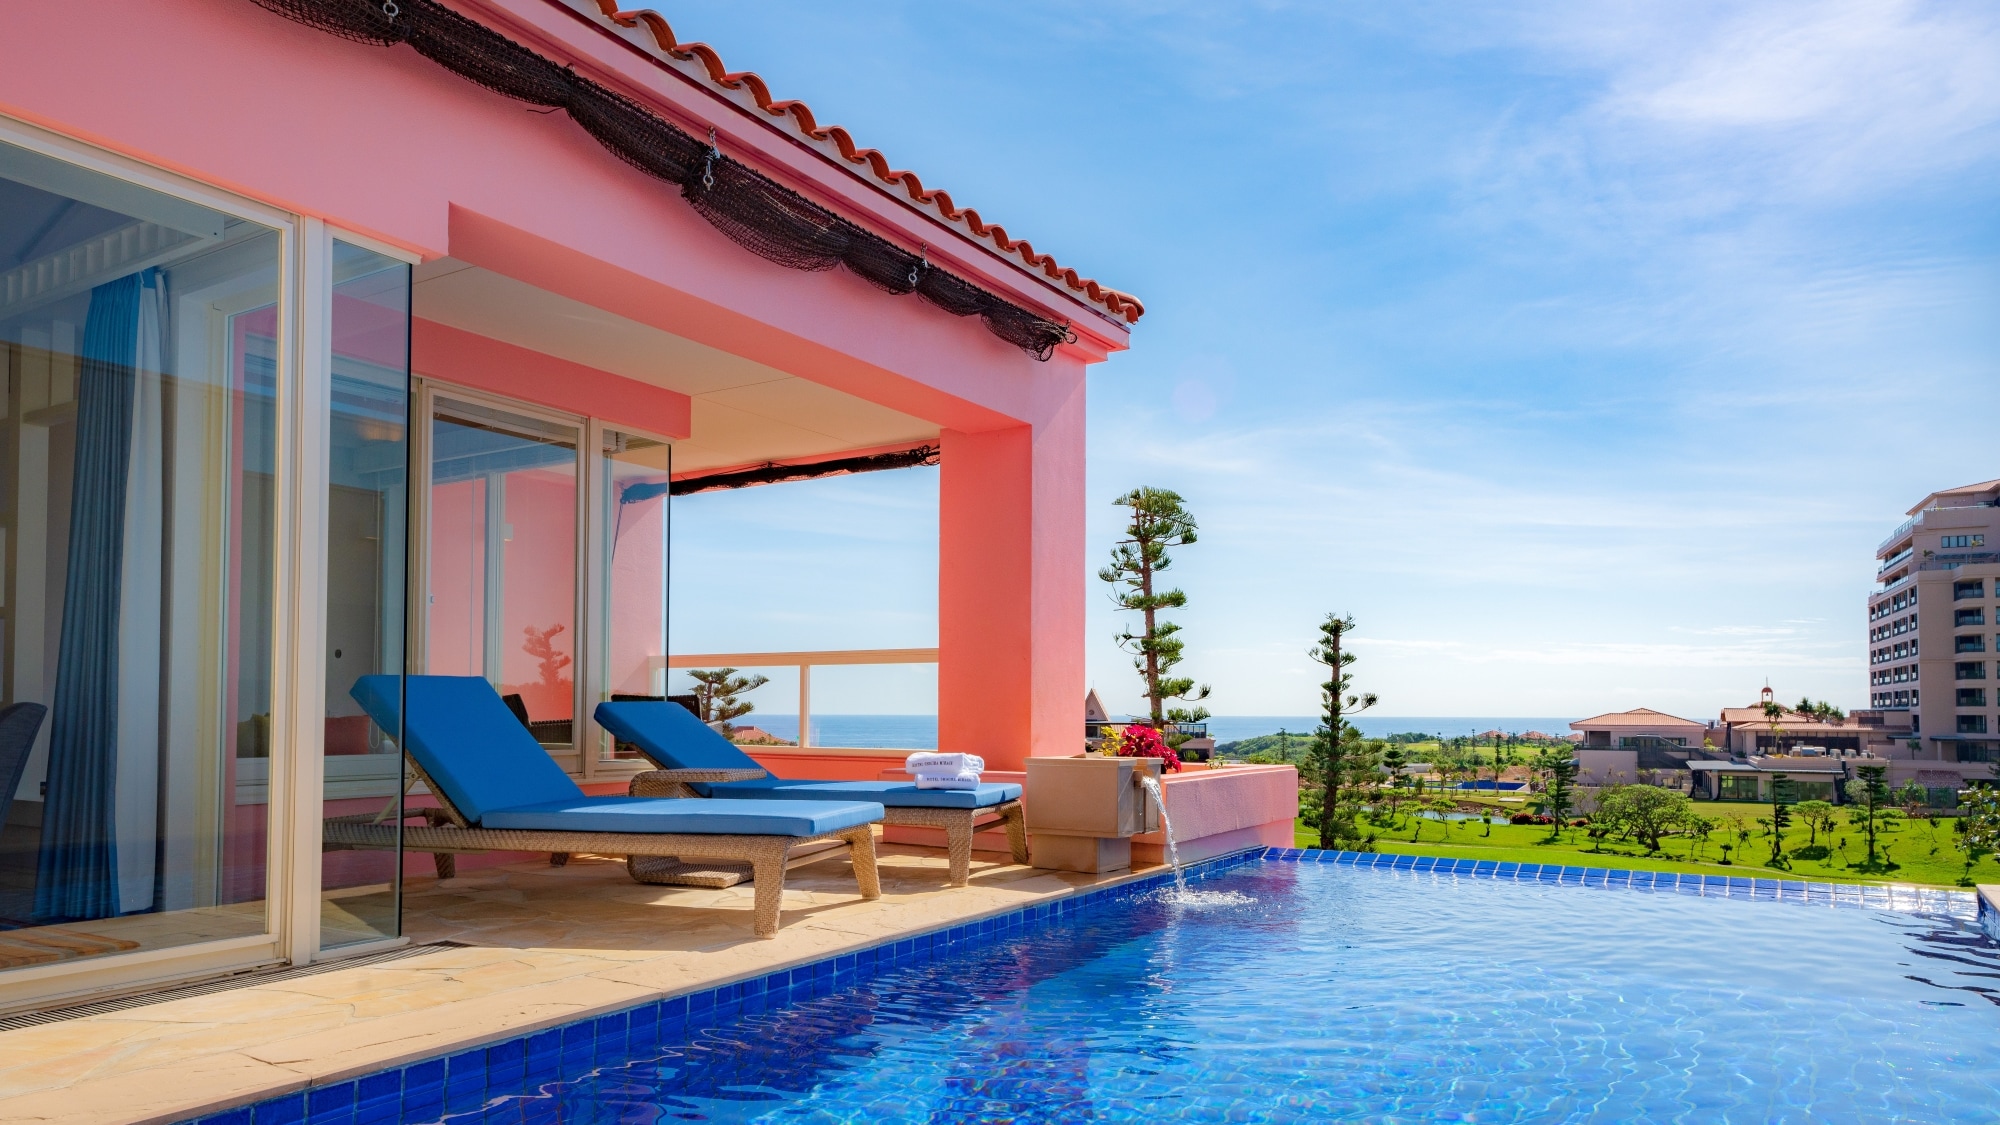 [Pool Villa Premier / Maisonette] A private pool spreads out on the terrace